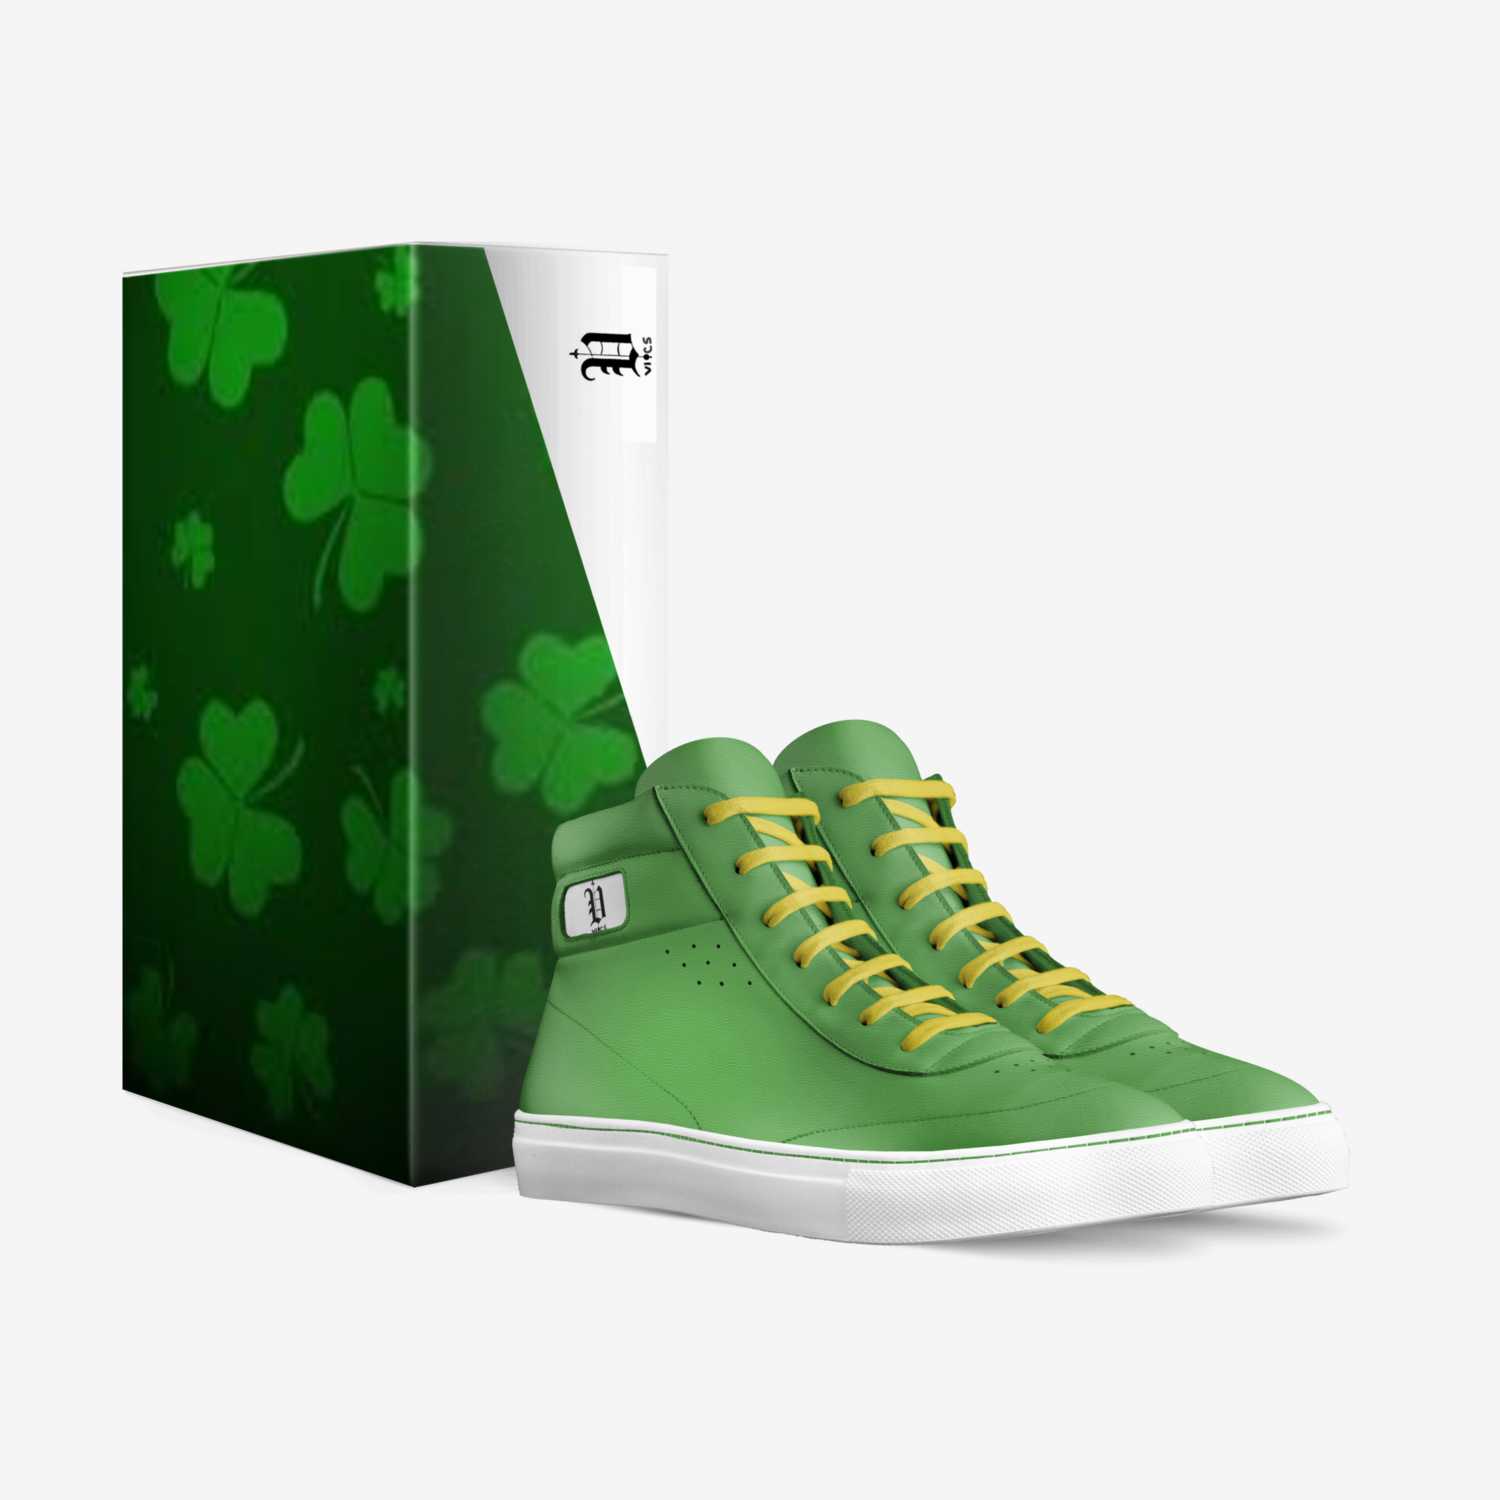 Vics saint patrick custom made in Italy shoes by Brayden Murphy | Box view